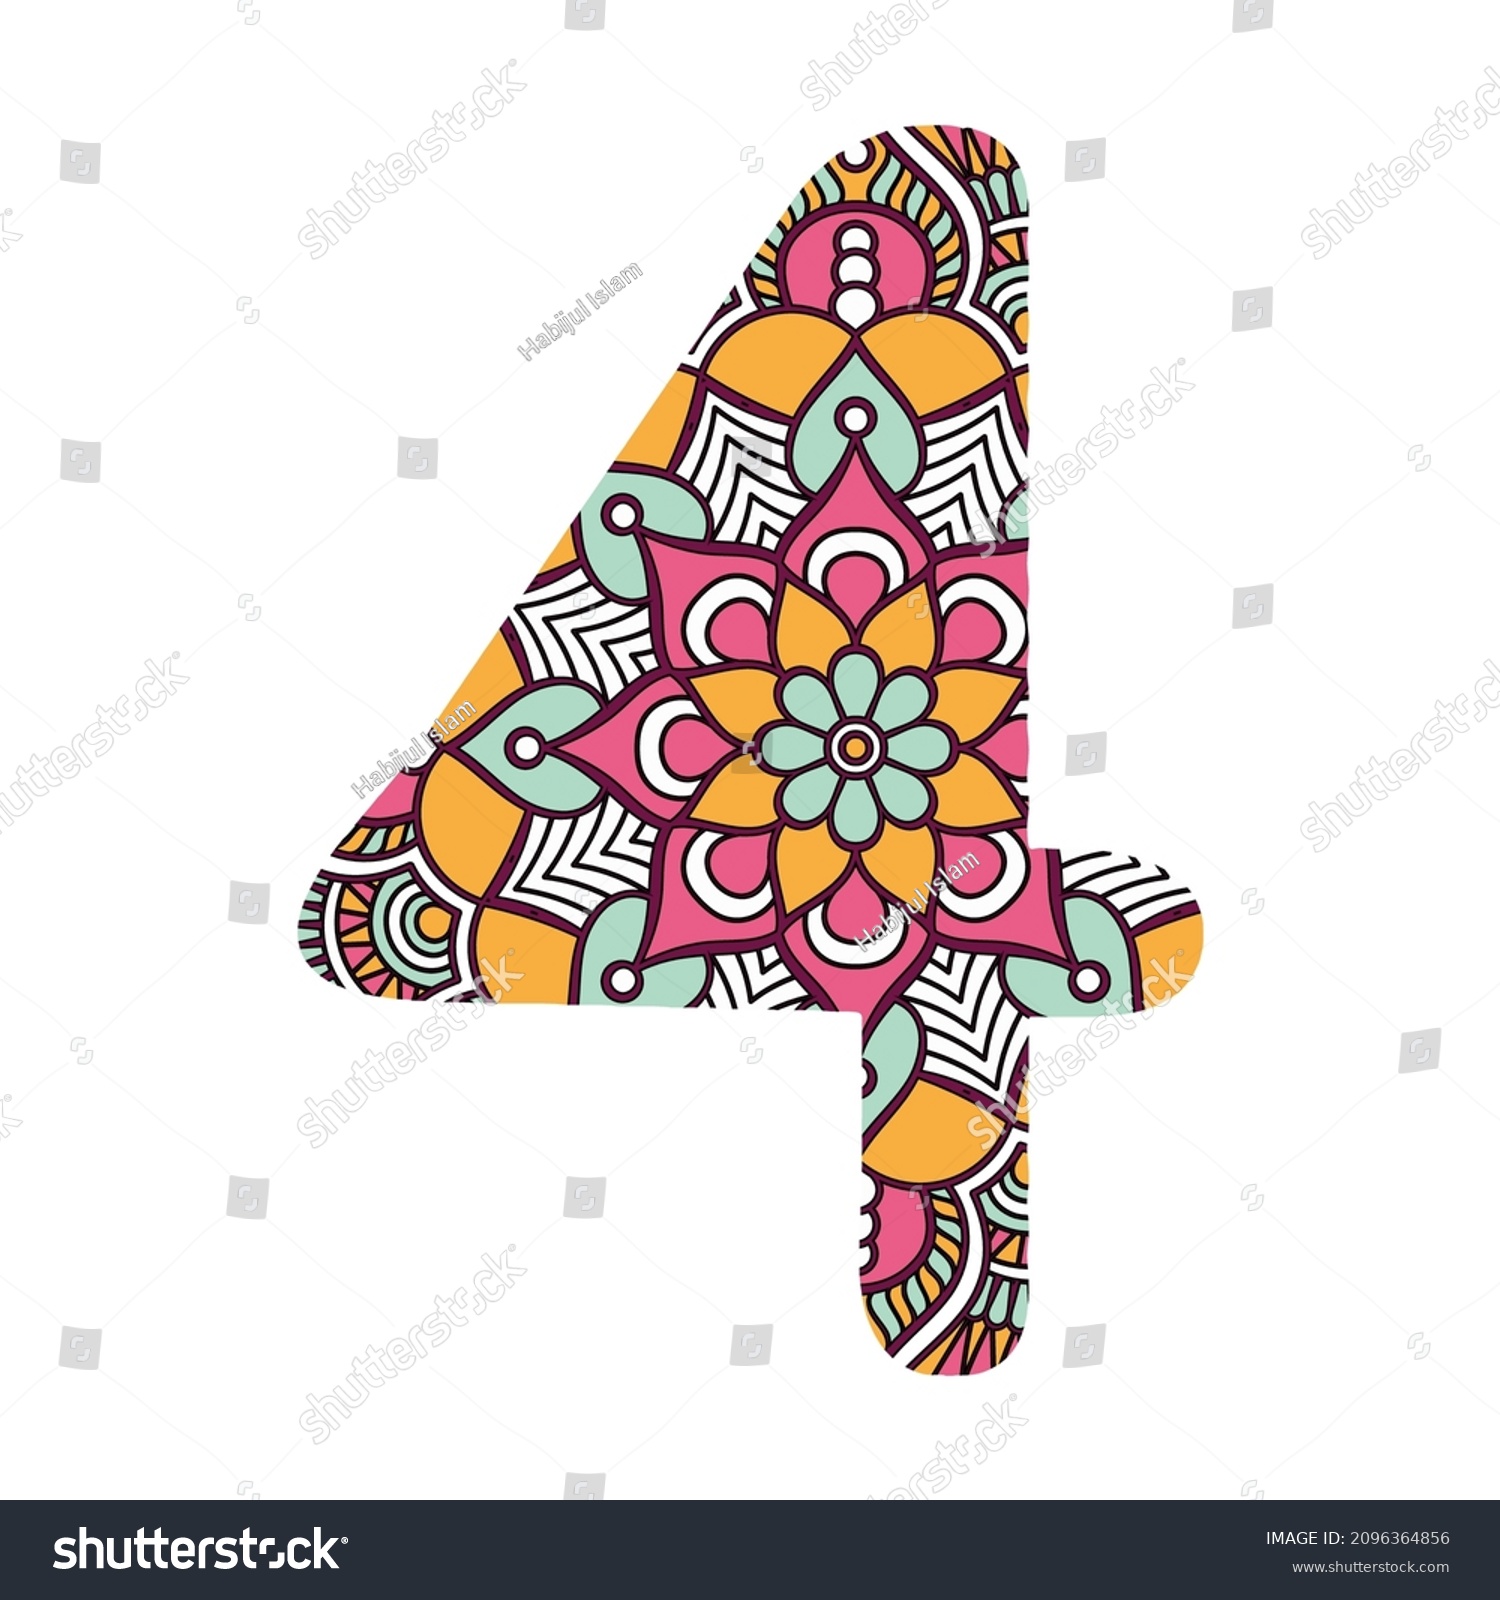 SVG of Adult coloring page with number 4. Empty linear contour isolated on white background. Coloring vector illustration in the Zentangle style. svg